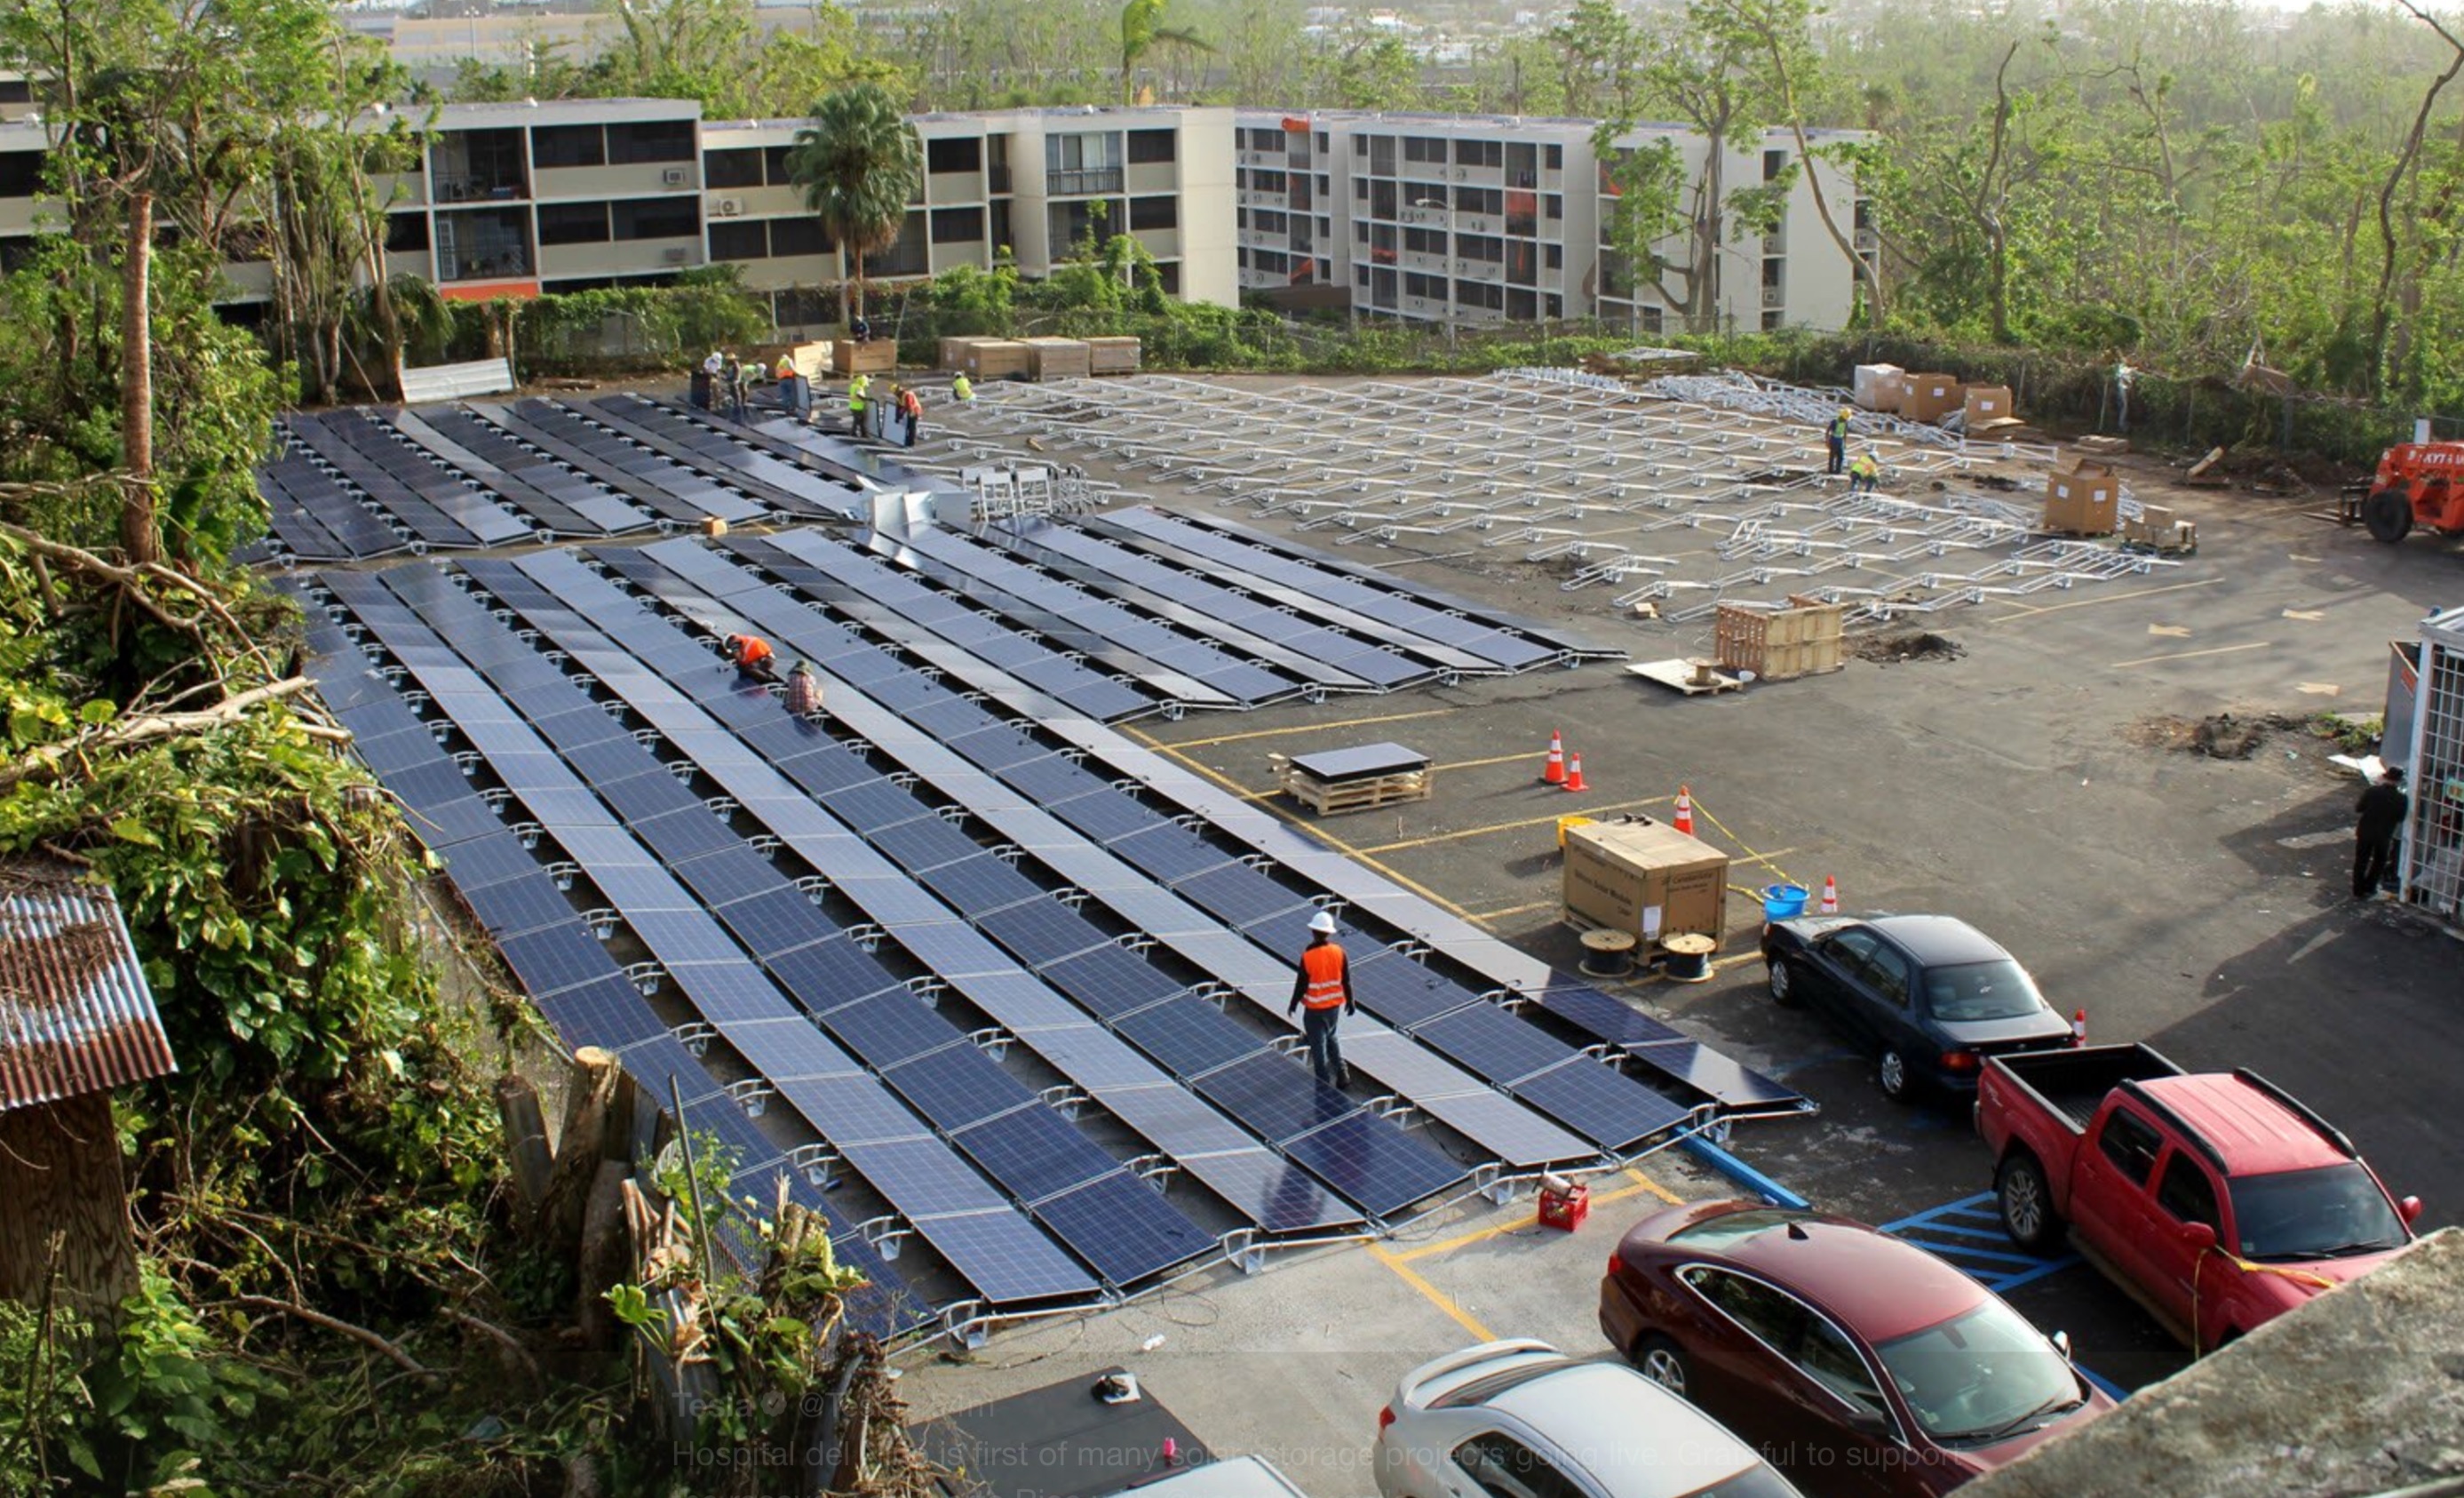 Solar panels set up by Tesla, are seen at the San Juan Children's Hospital, after the island was hit by Hurricane Maria in September, in San Juan, Puerto Rico, 2017.